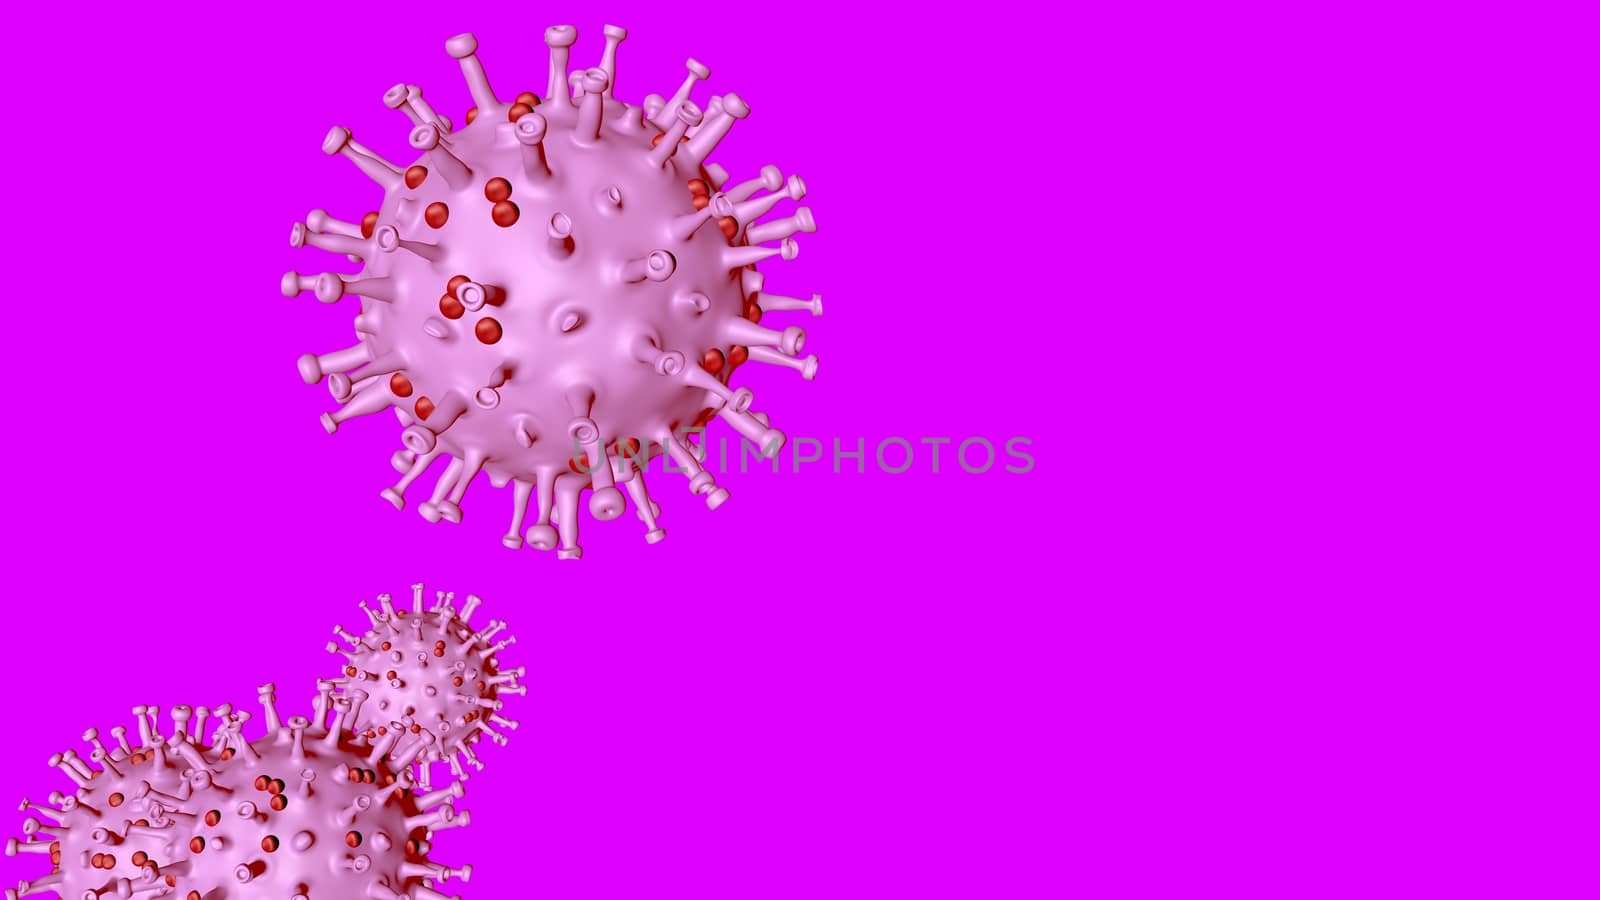 3D illustration of a virus particle. Closeup of a virus structure against clear background with copy space for text